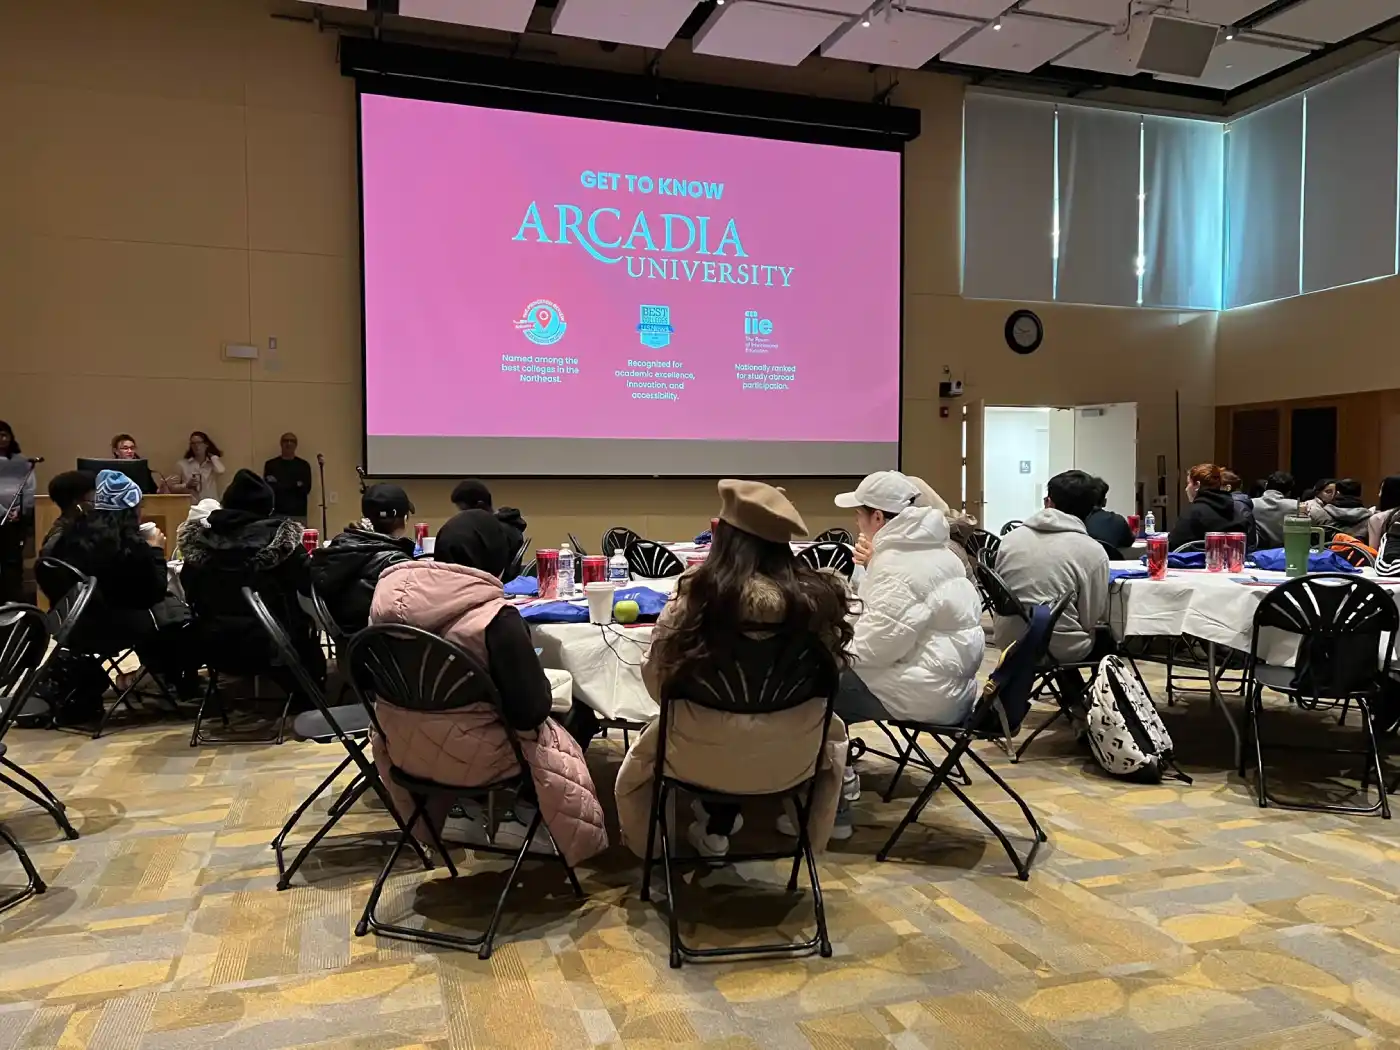 High School students getting to know Arcadia University